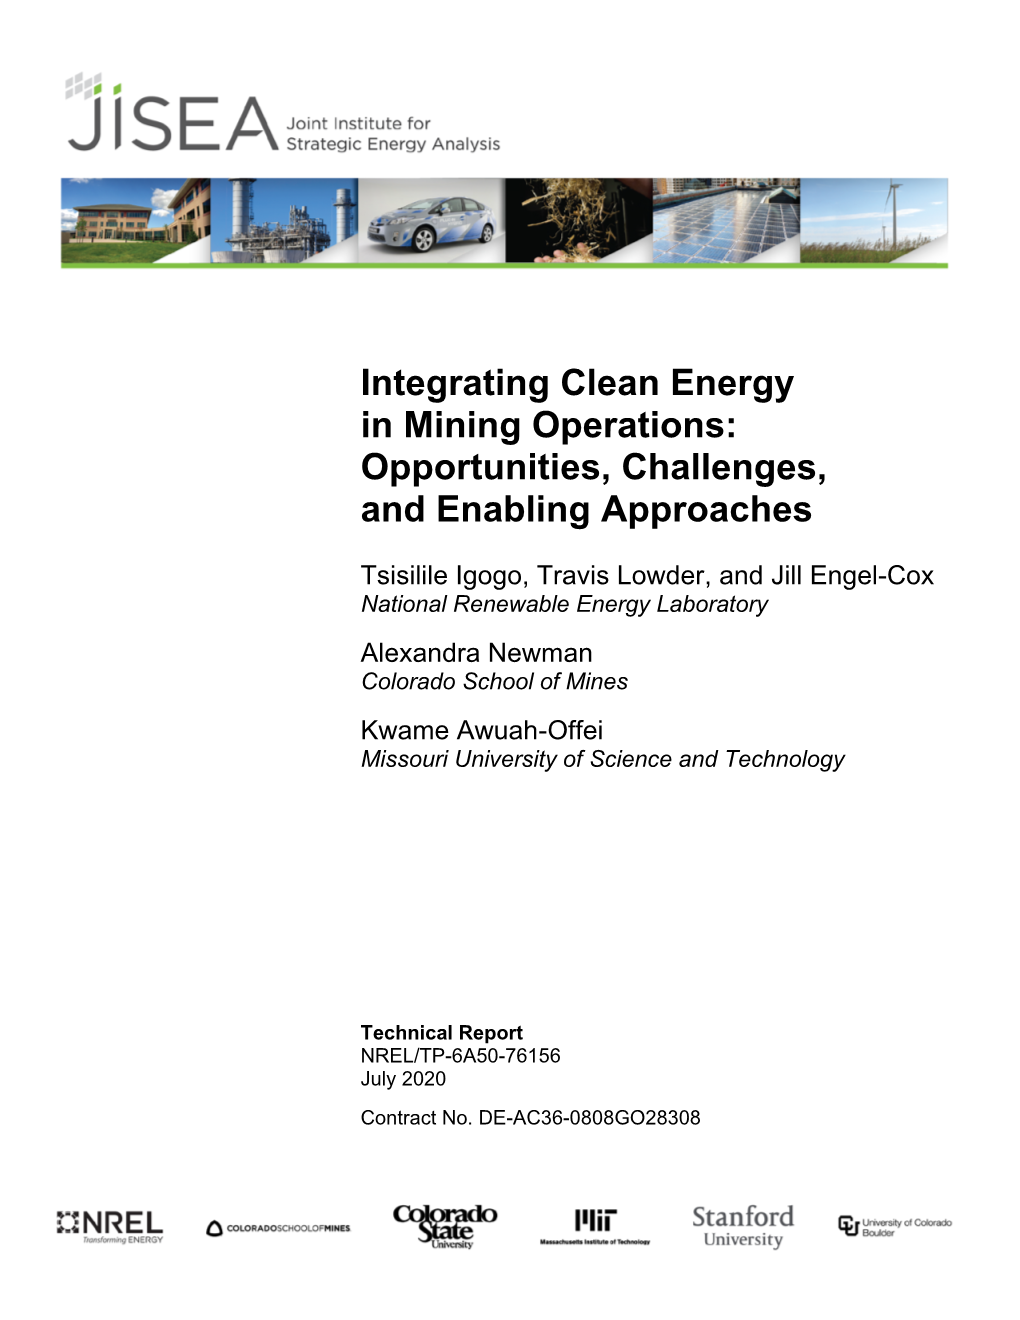 Integrating Clean Energy in Mining Operations: Opportunities, Challenges, and Enabling Approaches